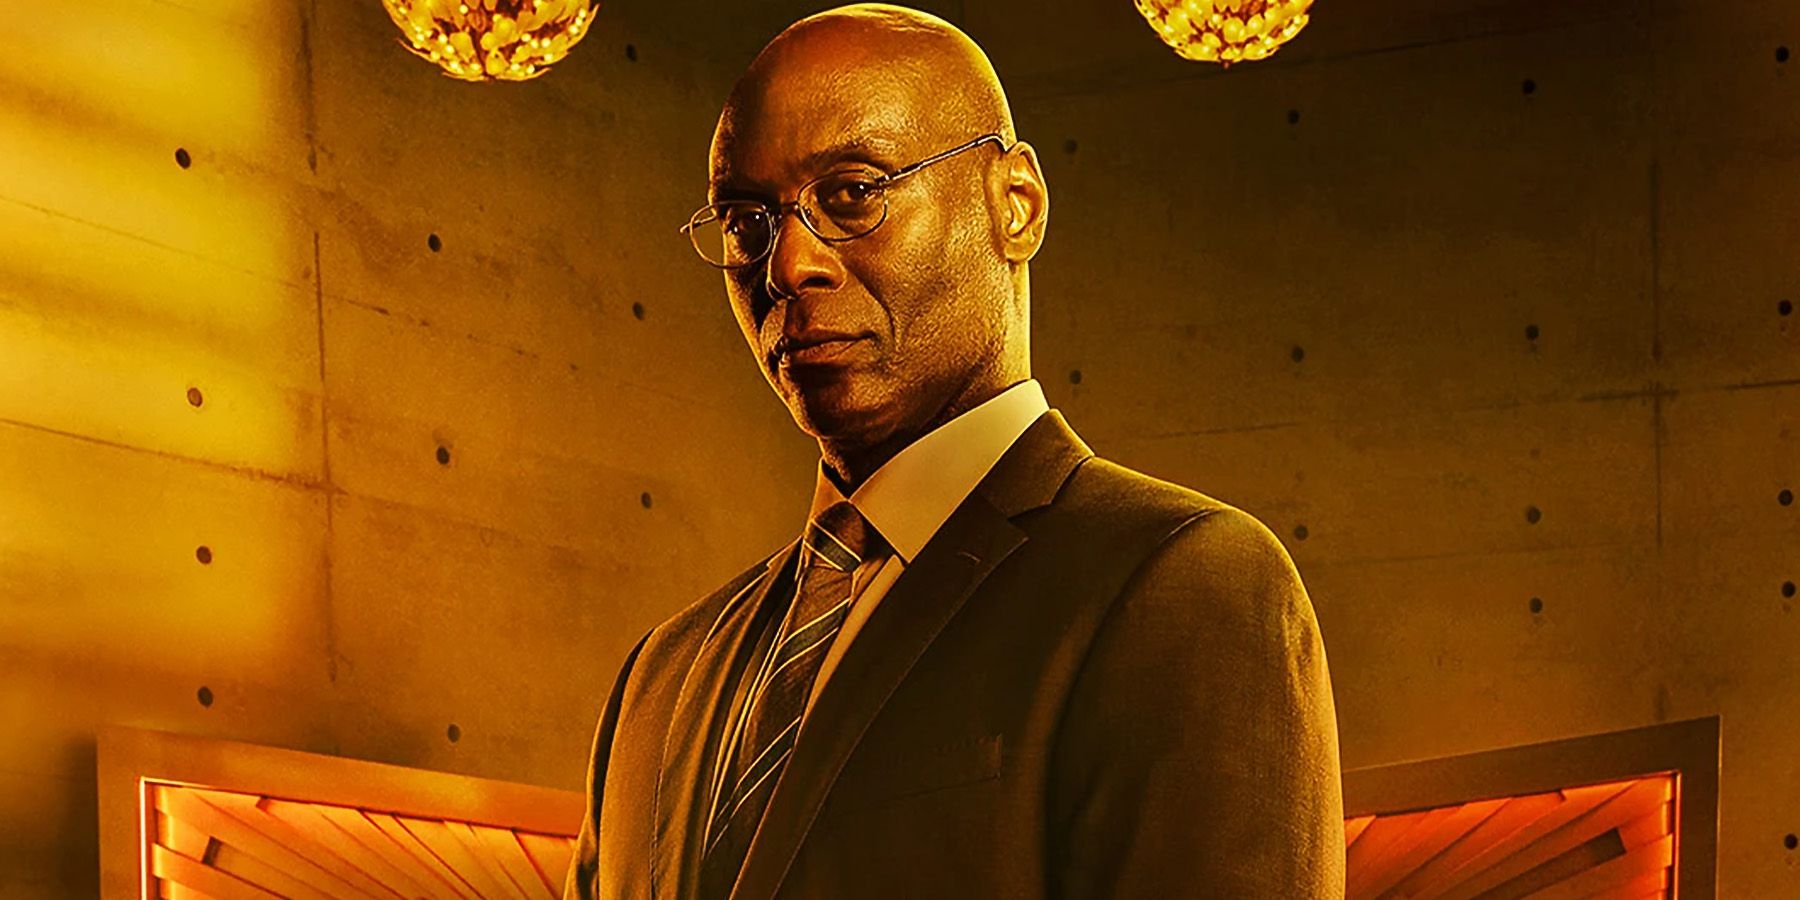 Bungie Comments on Lance Reddick's Passing